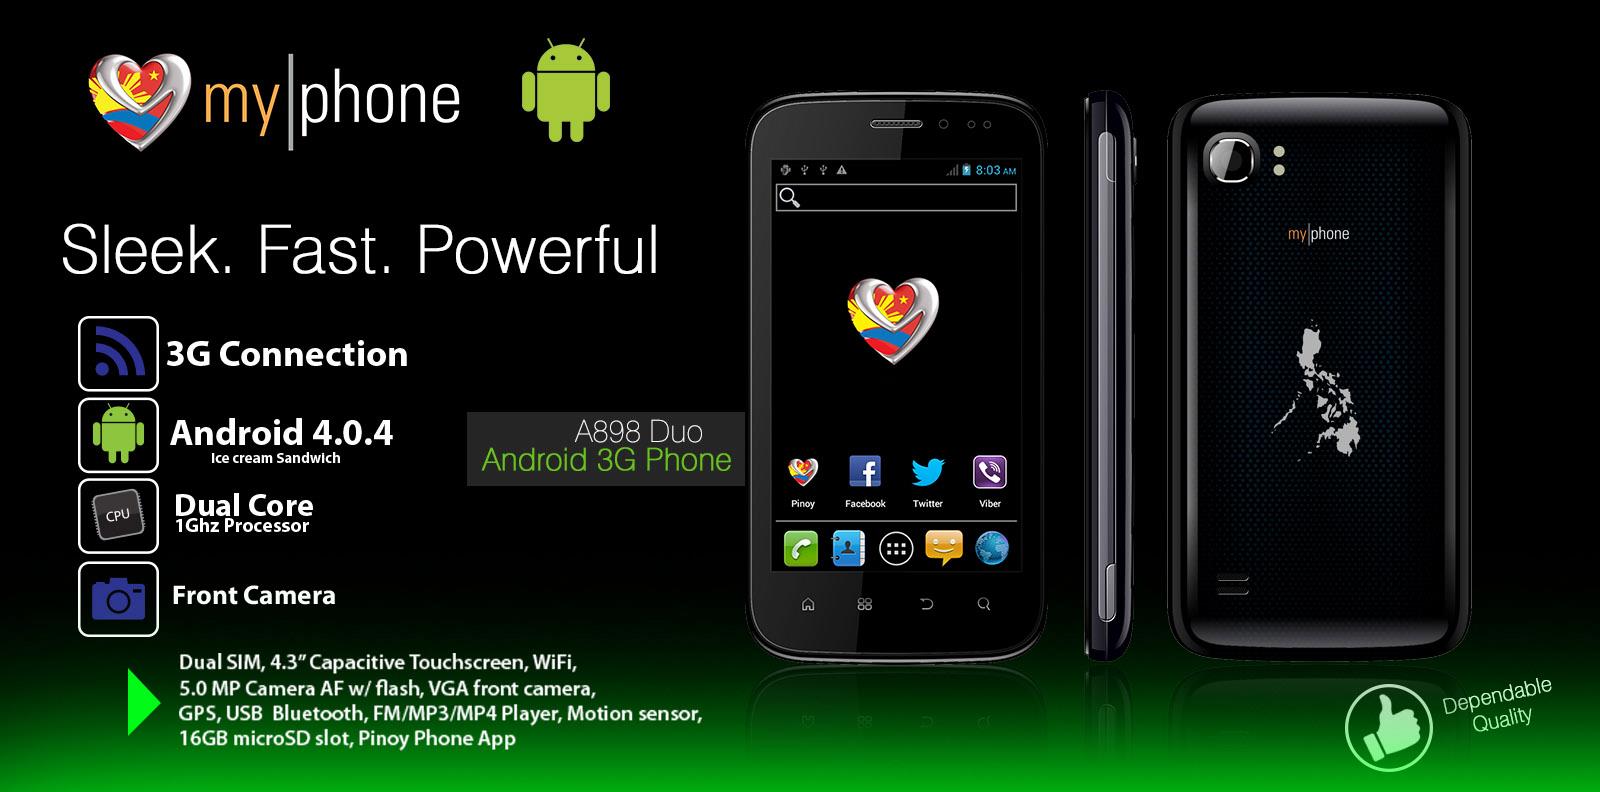 MyPhone A898 DUO Android 3G Phone